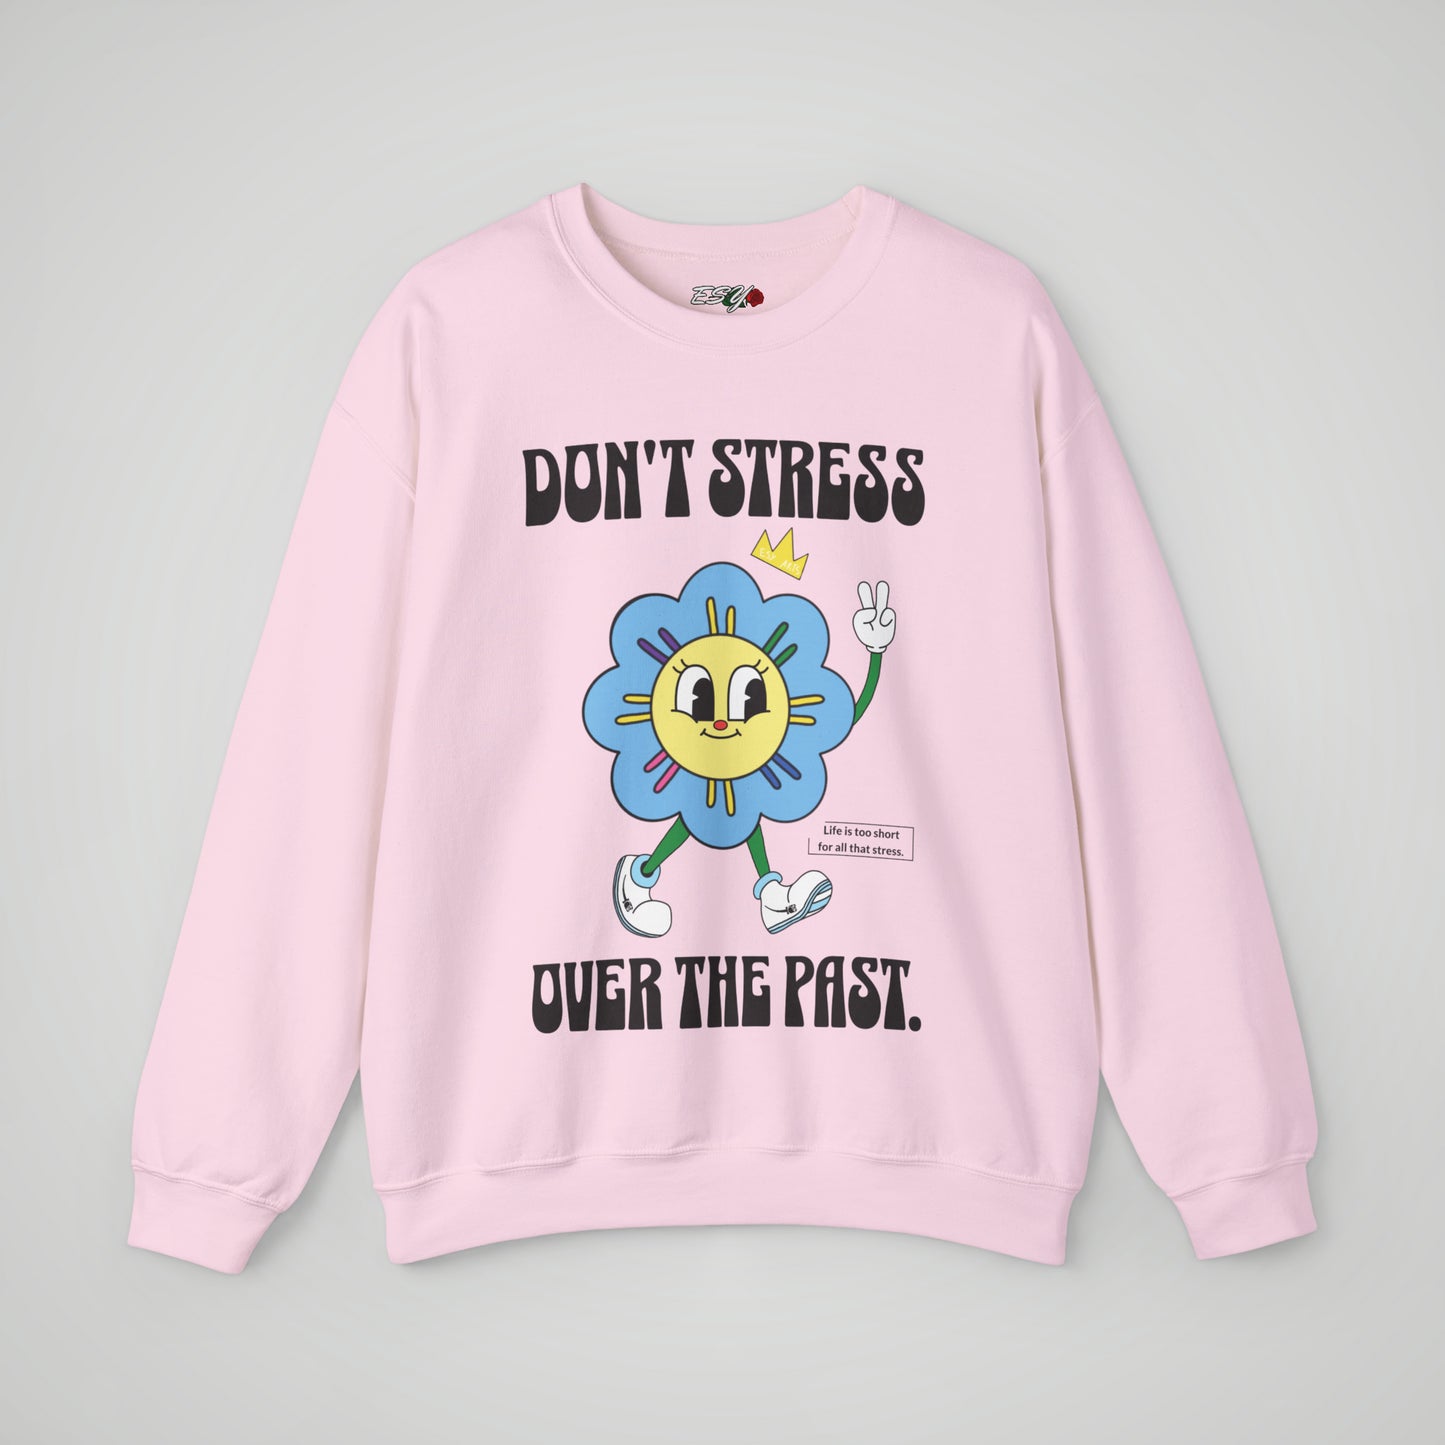 Don't Stress Over the Past Light Pink Sweatshirt